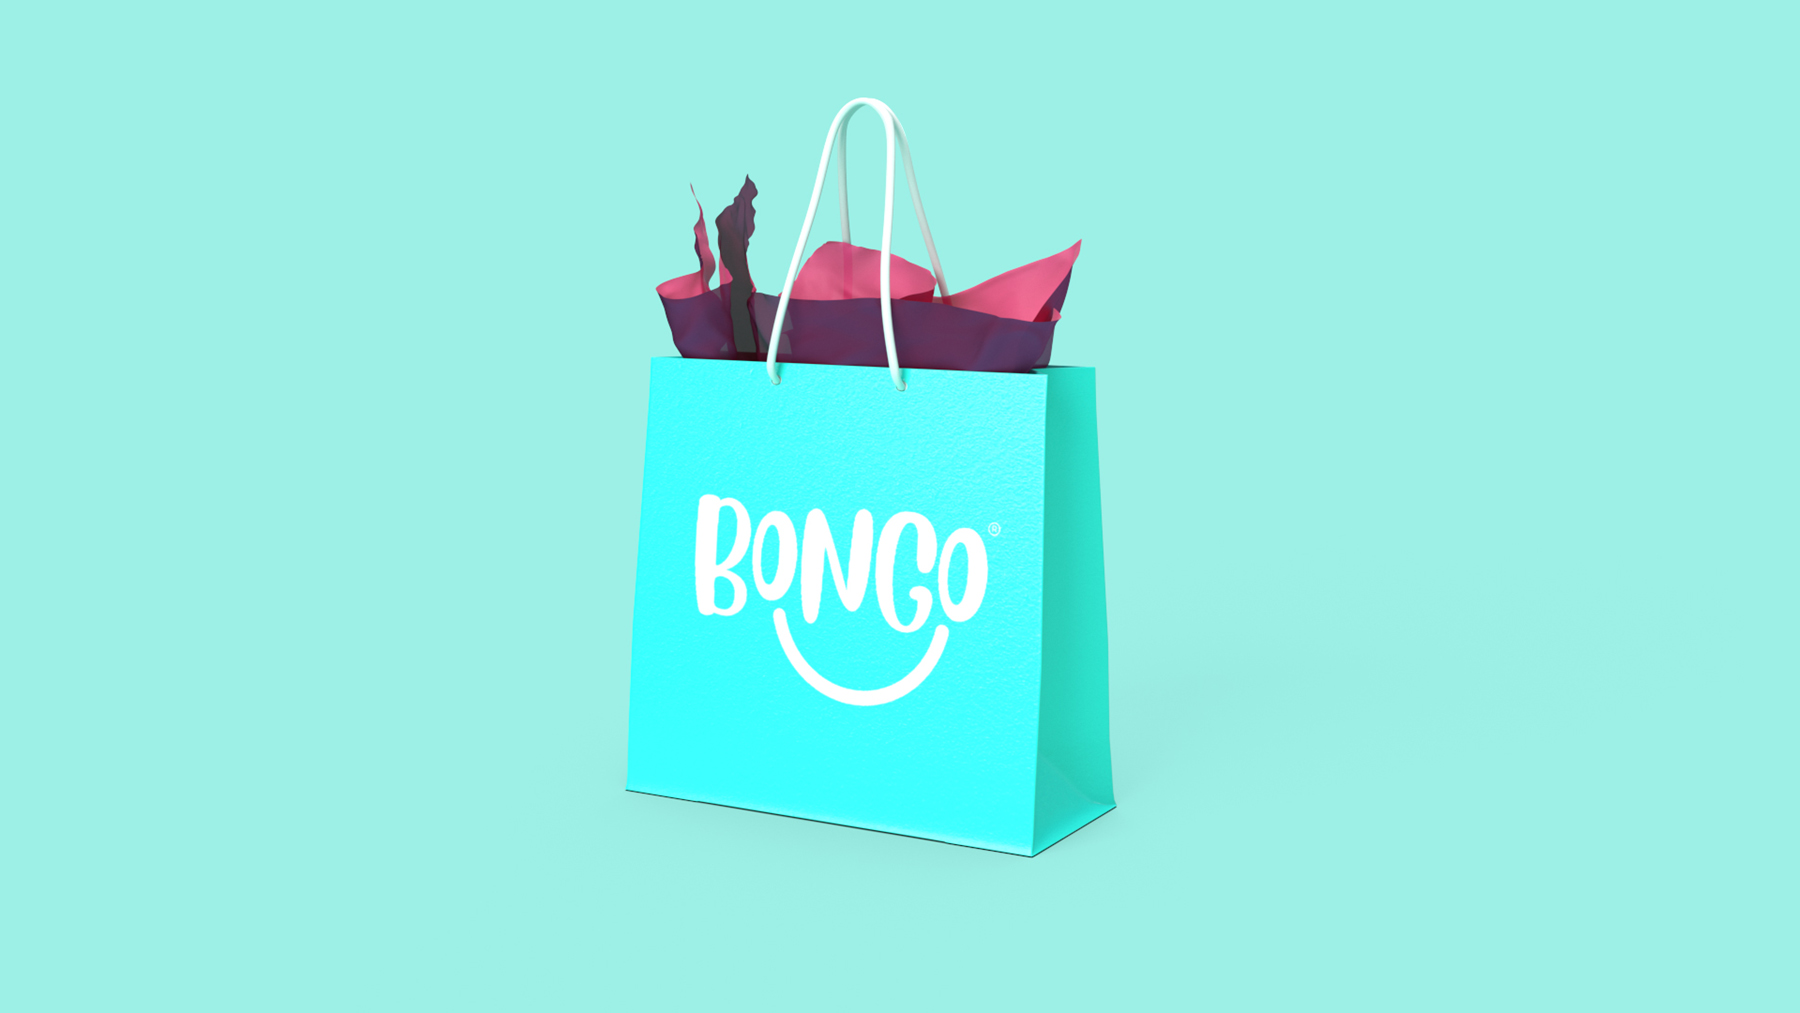 A party bag featuring the final Bongo Parties' brand identity design.